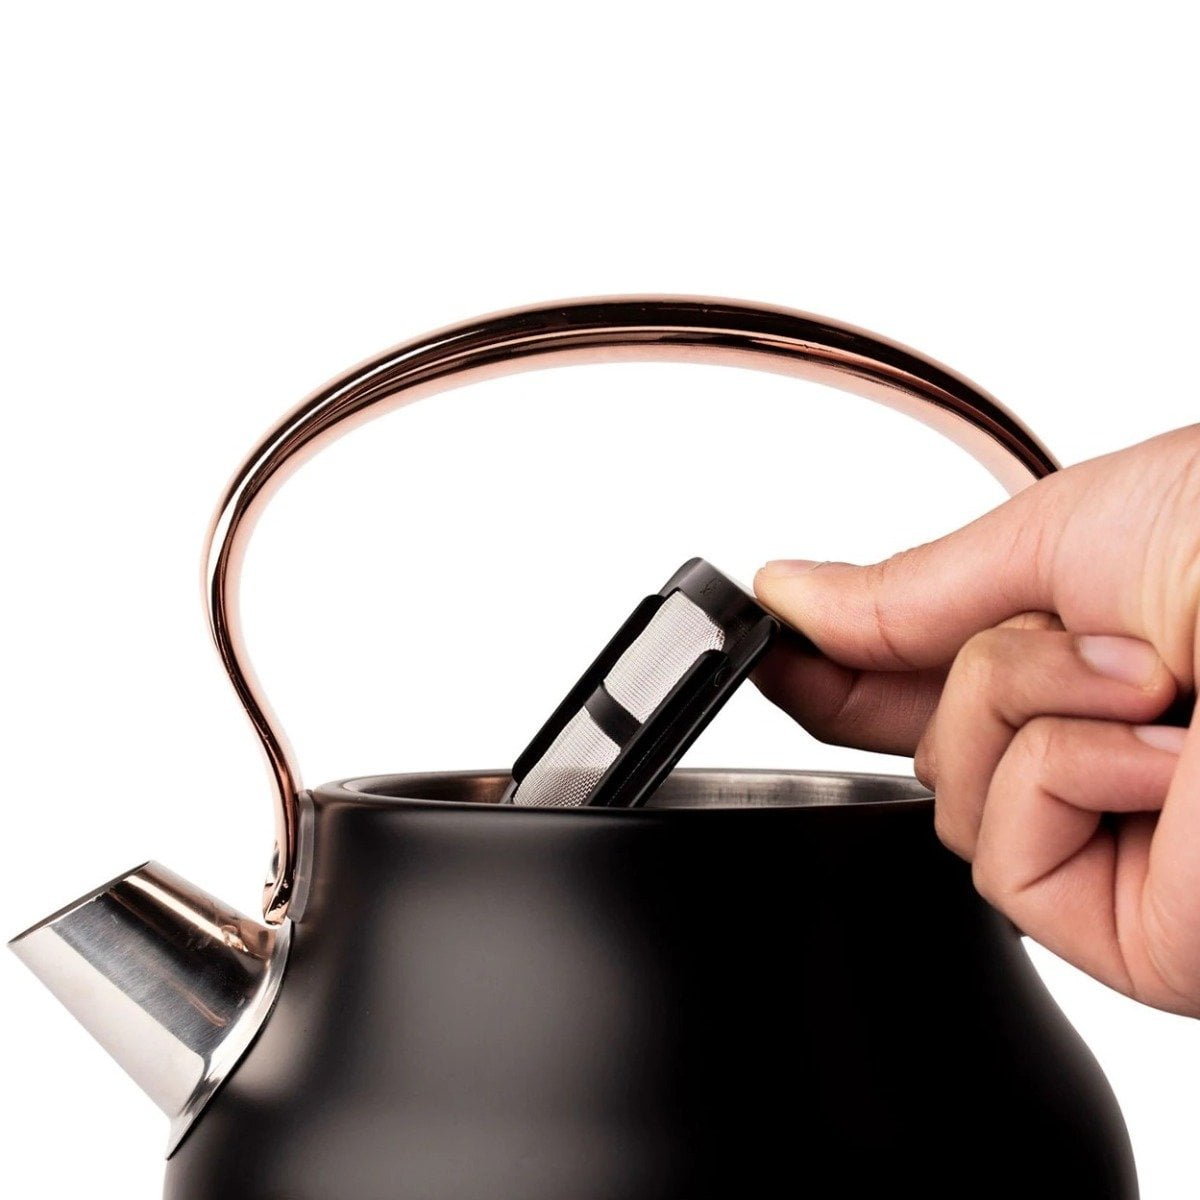 HADEN Heritage Black and Copper Electric Tea Kettle